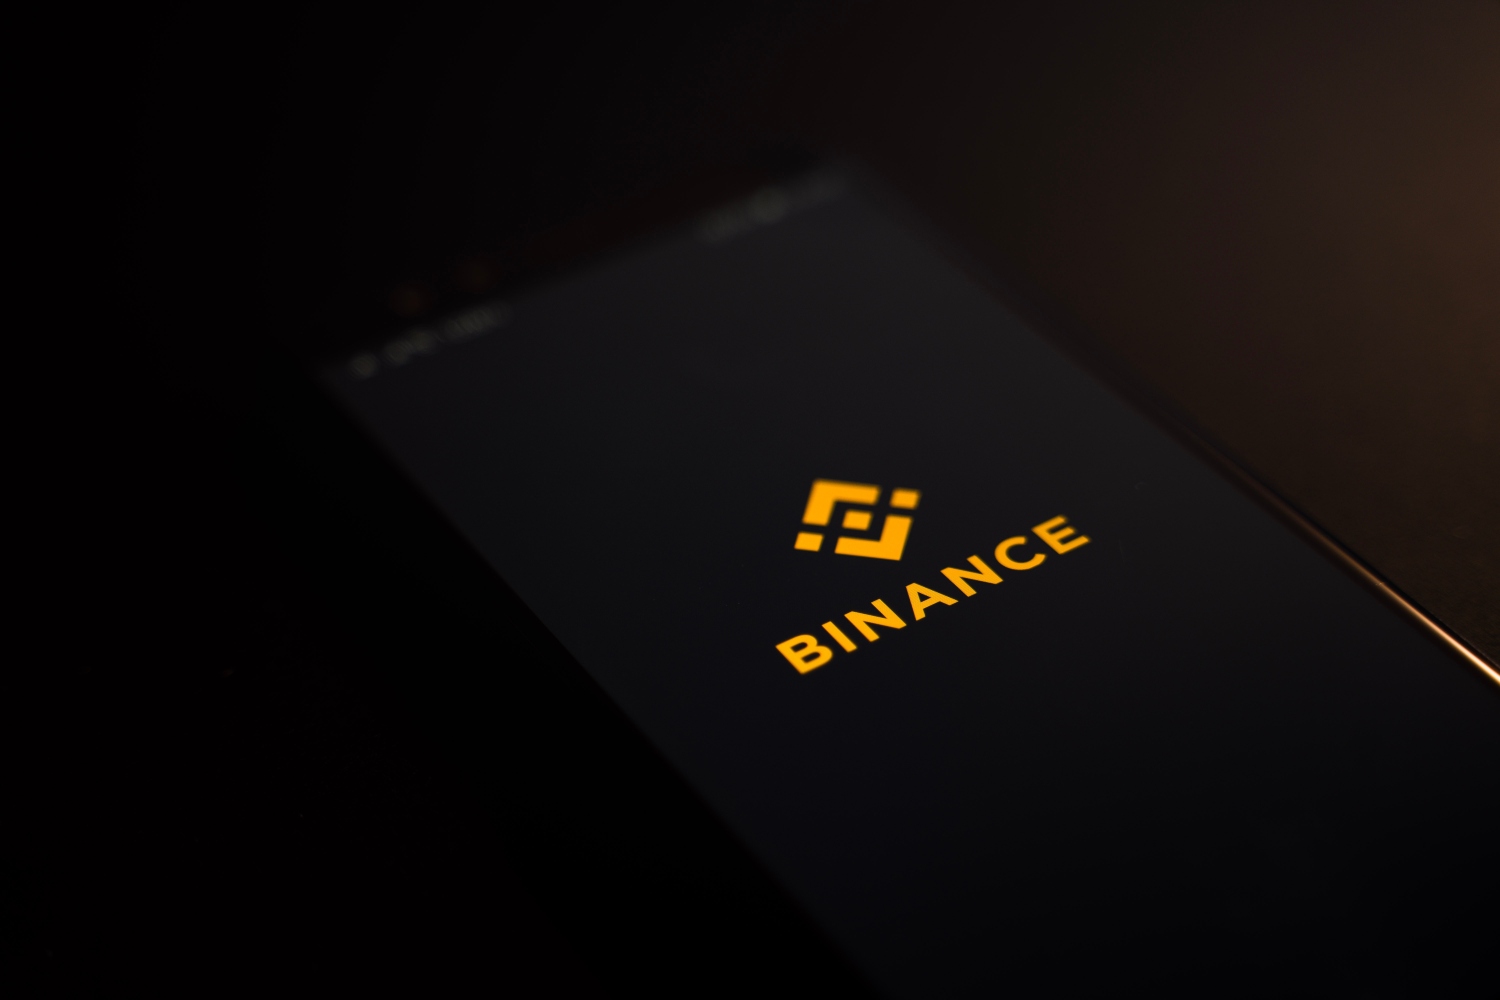 Binance Officially Sets Up Shop in New Zealand